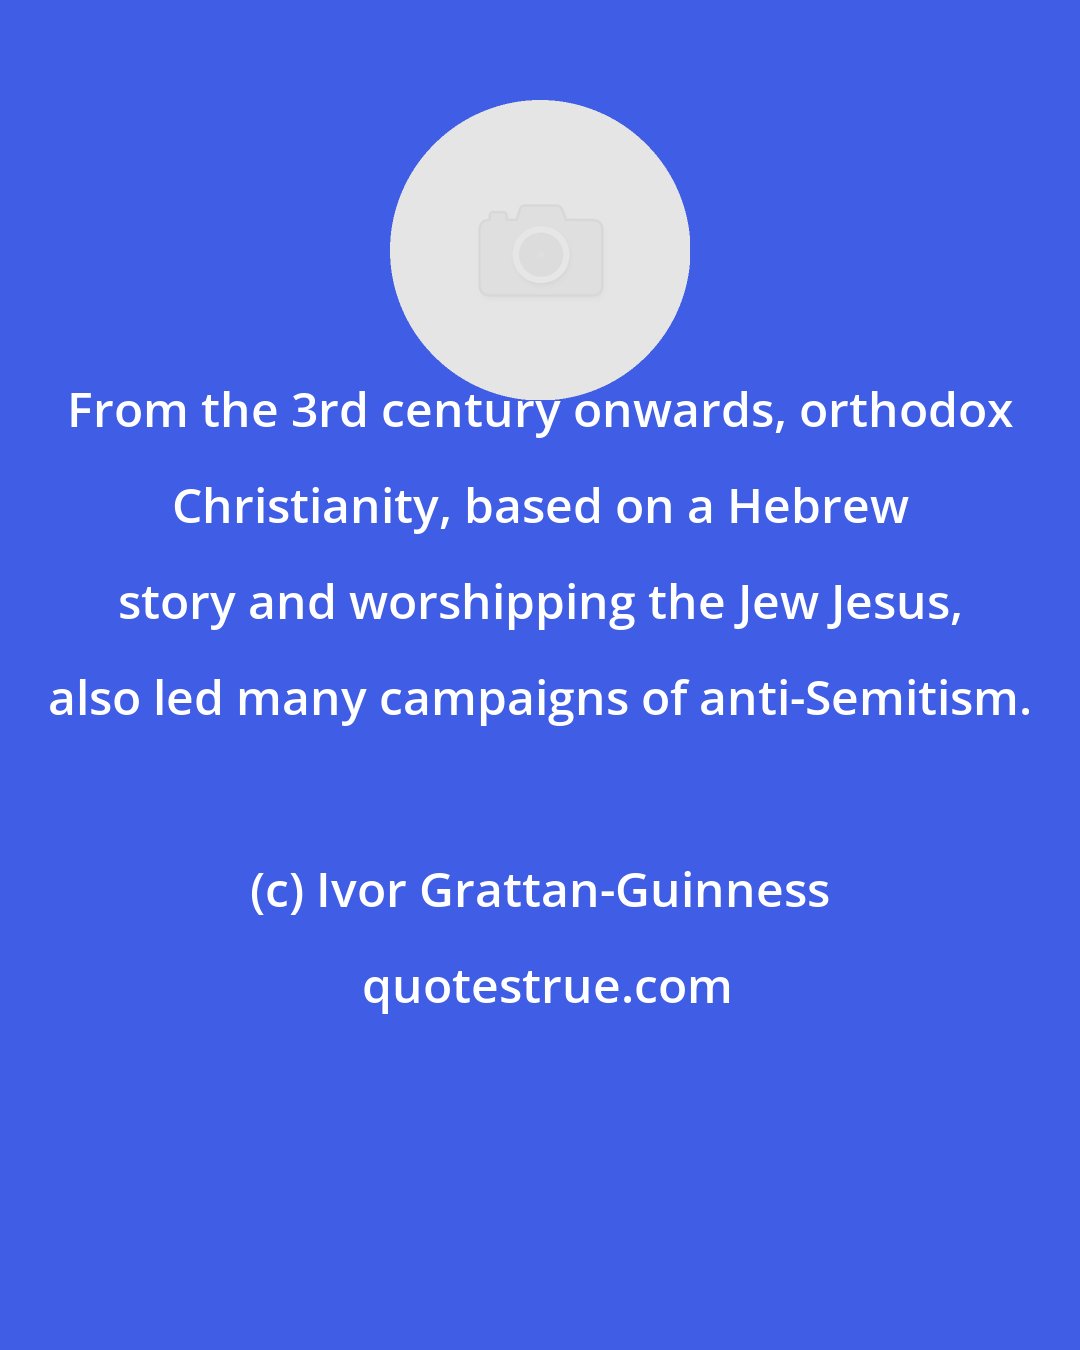 Ivor Grattan-Guinness: From the 3rd century onwards, orthodox Christianity, based on a Hebrew story and worshipping the Jew Jesus, also led many campaigns of anti-Semitism.